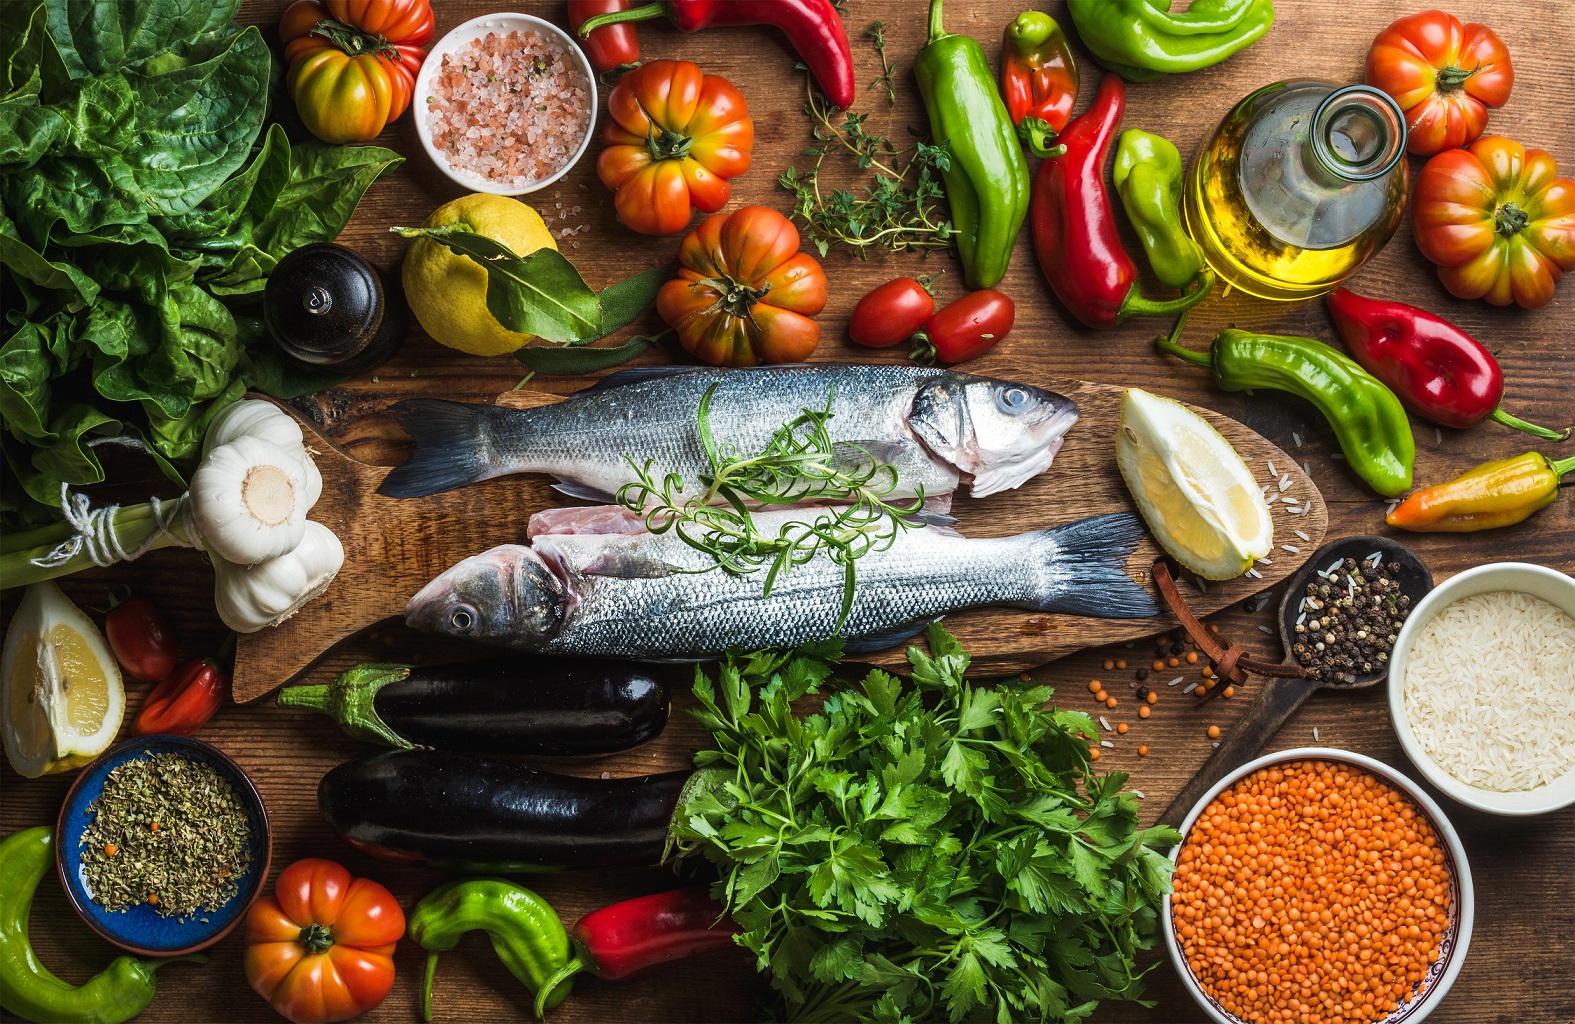 Women less likely to suffer from heart disease because of a Mediterranean diet?